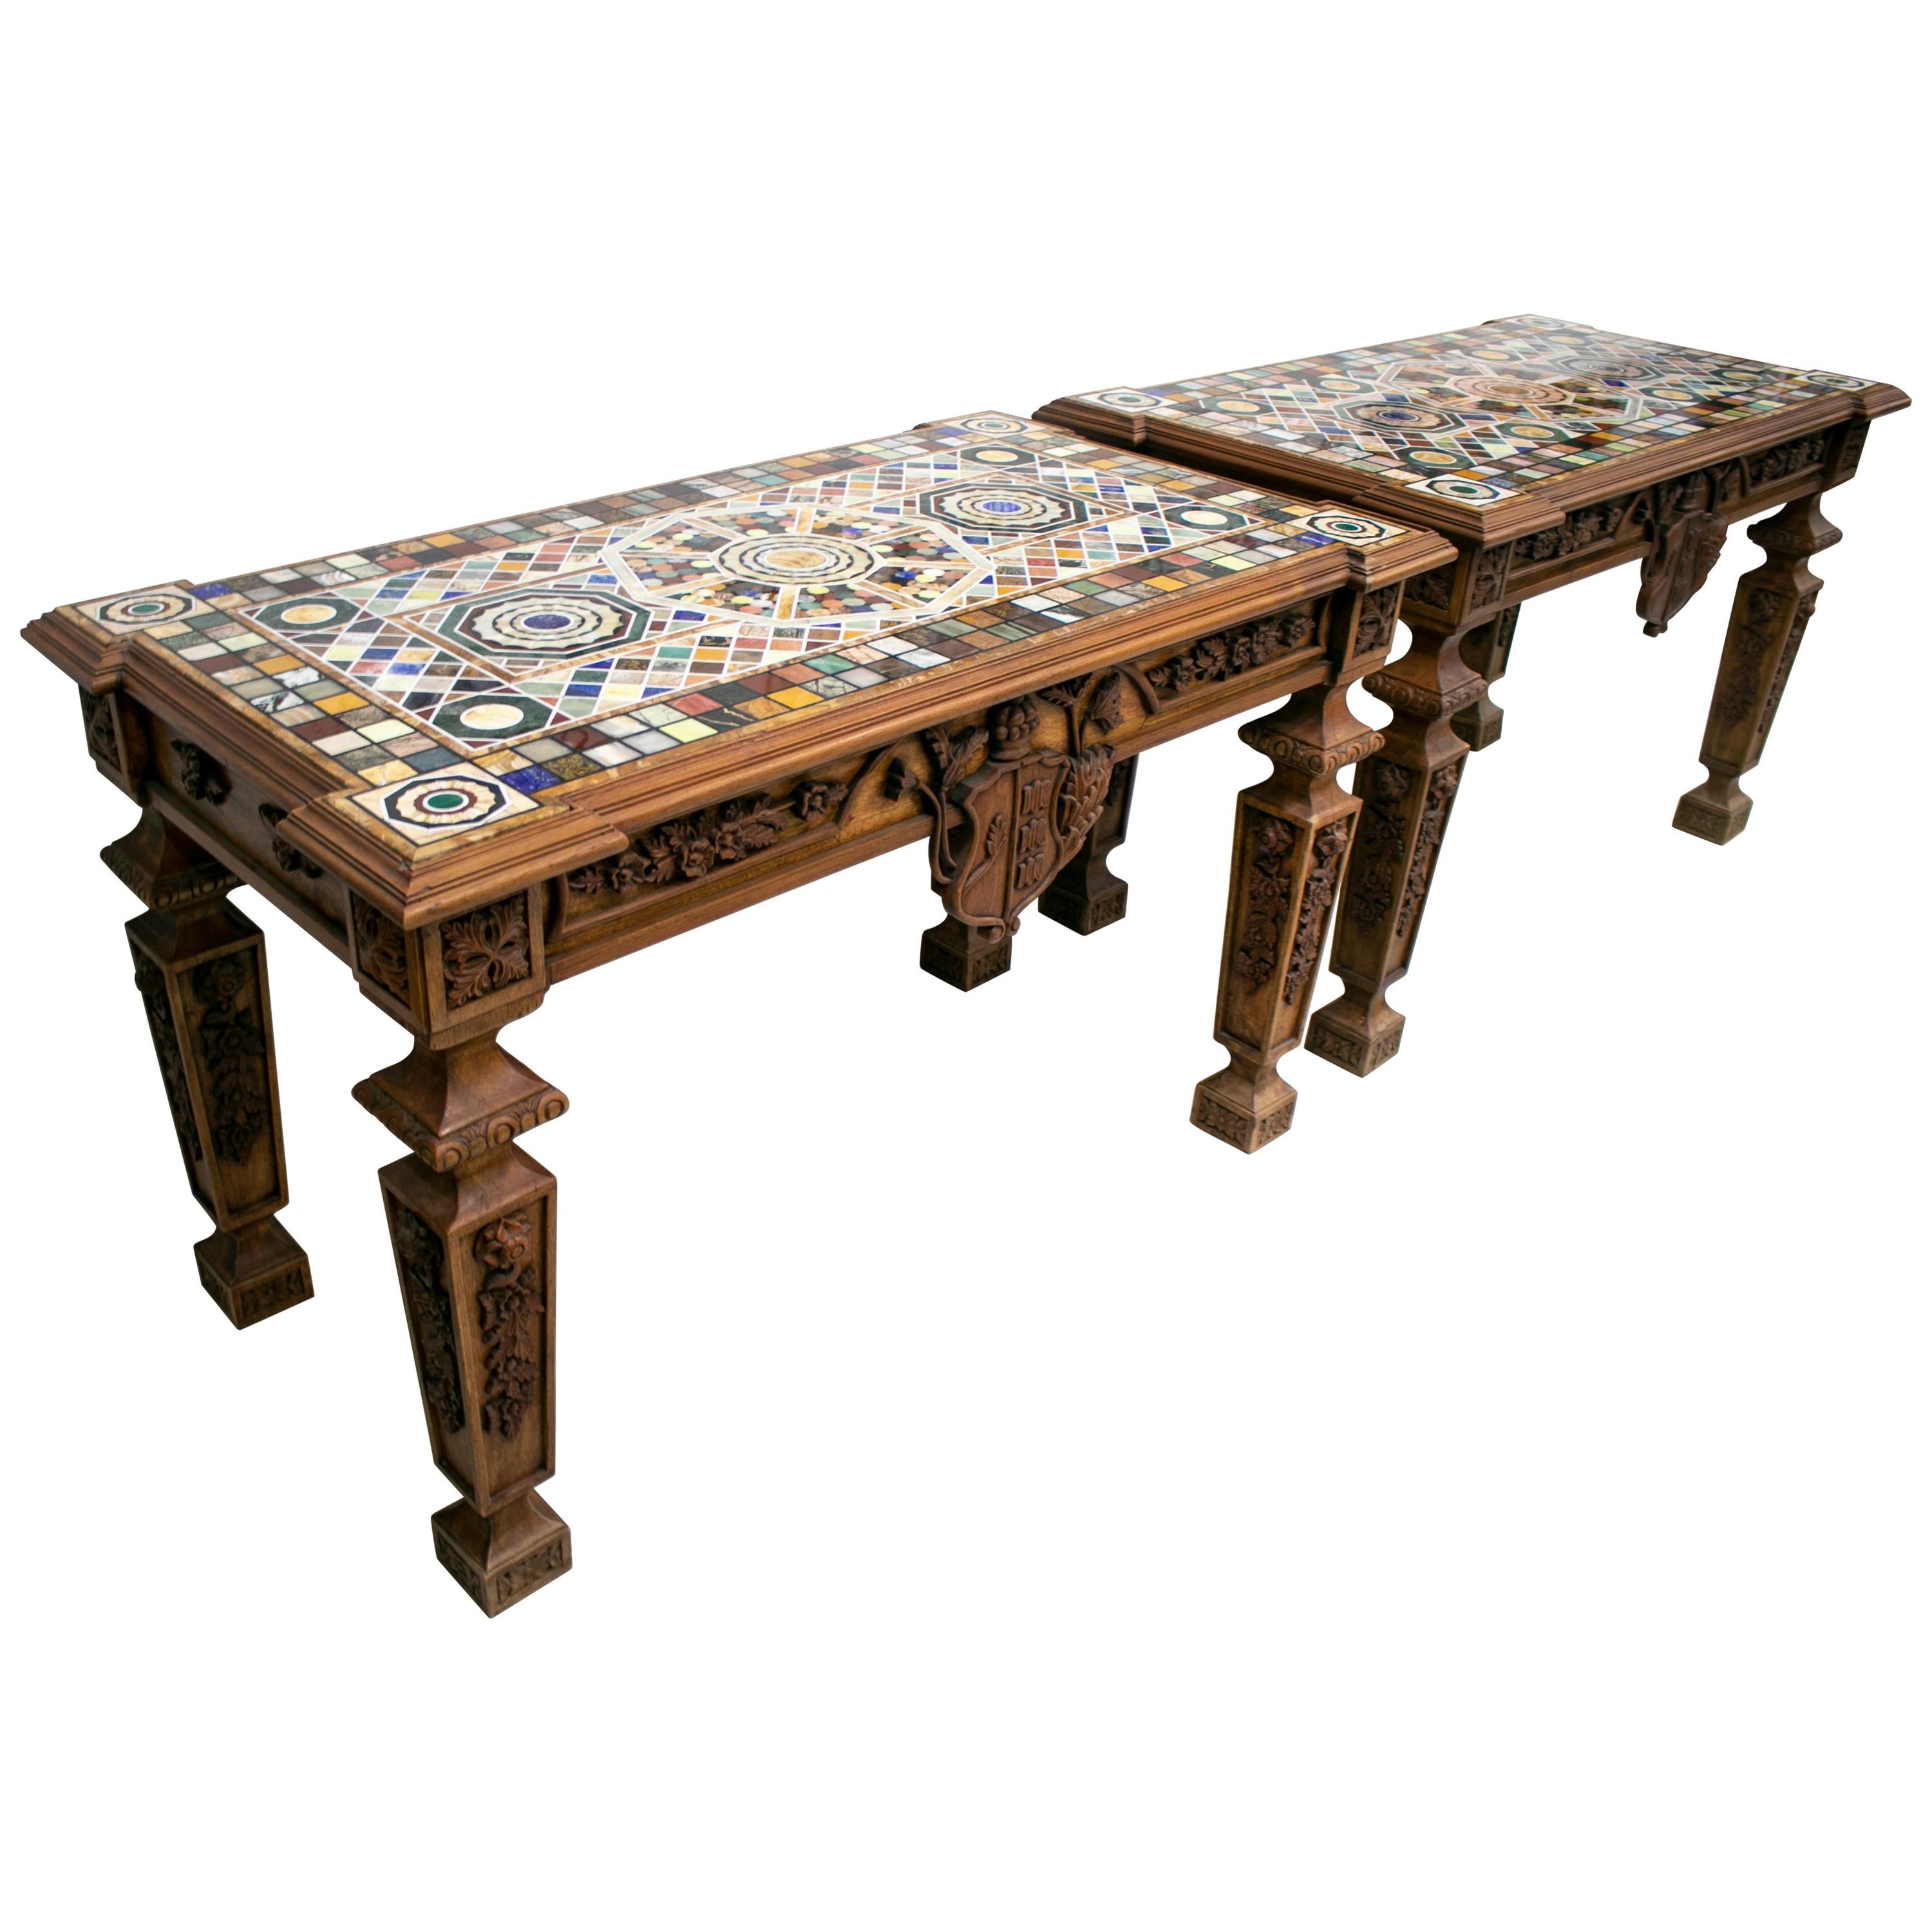 Pair of Handmade Rectangular Pietre Dure Mosaic Top Wooden Relieved Tables For Sale